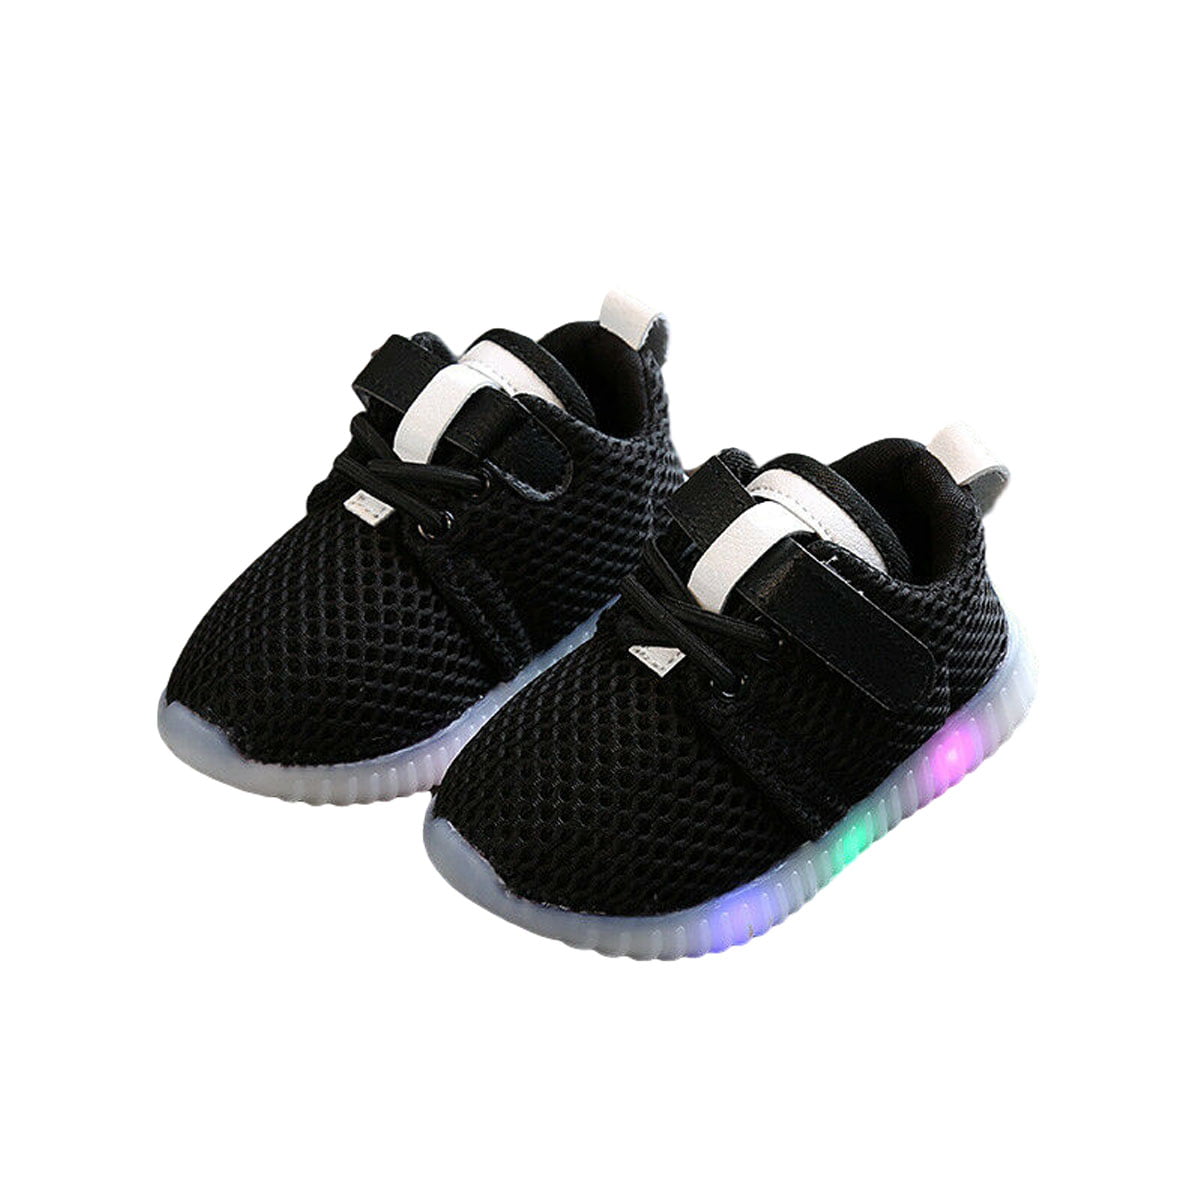 Unisex Baby Girls Boys Mesh Sneakers Led Luminous Light Sport Running Shoes Breathable Color Block Lace-up Flashing Trainers Casual Sneakers for 1-6 Years Old Kids